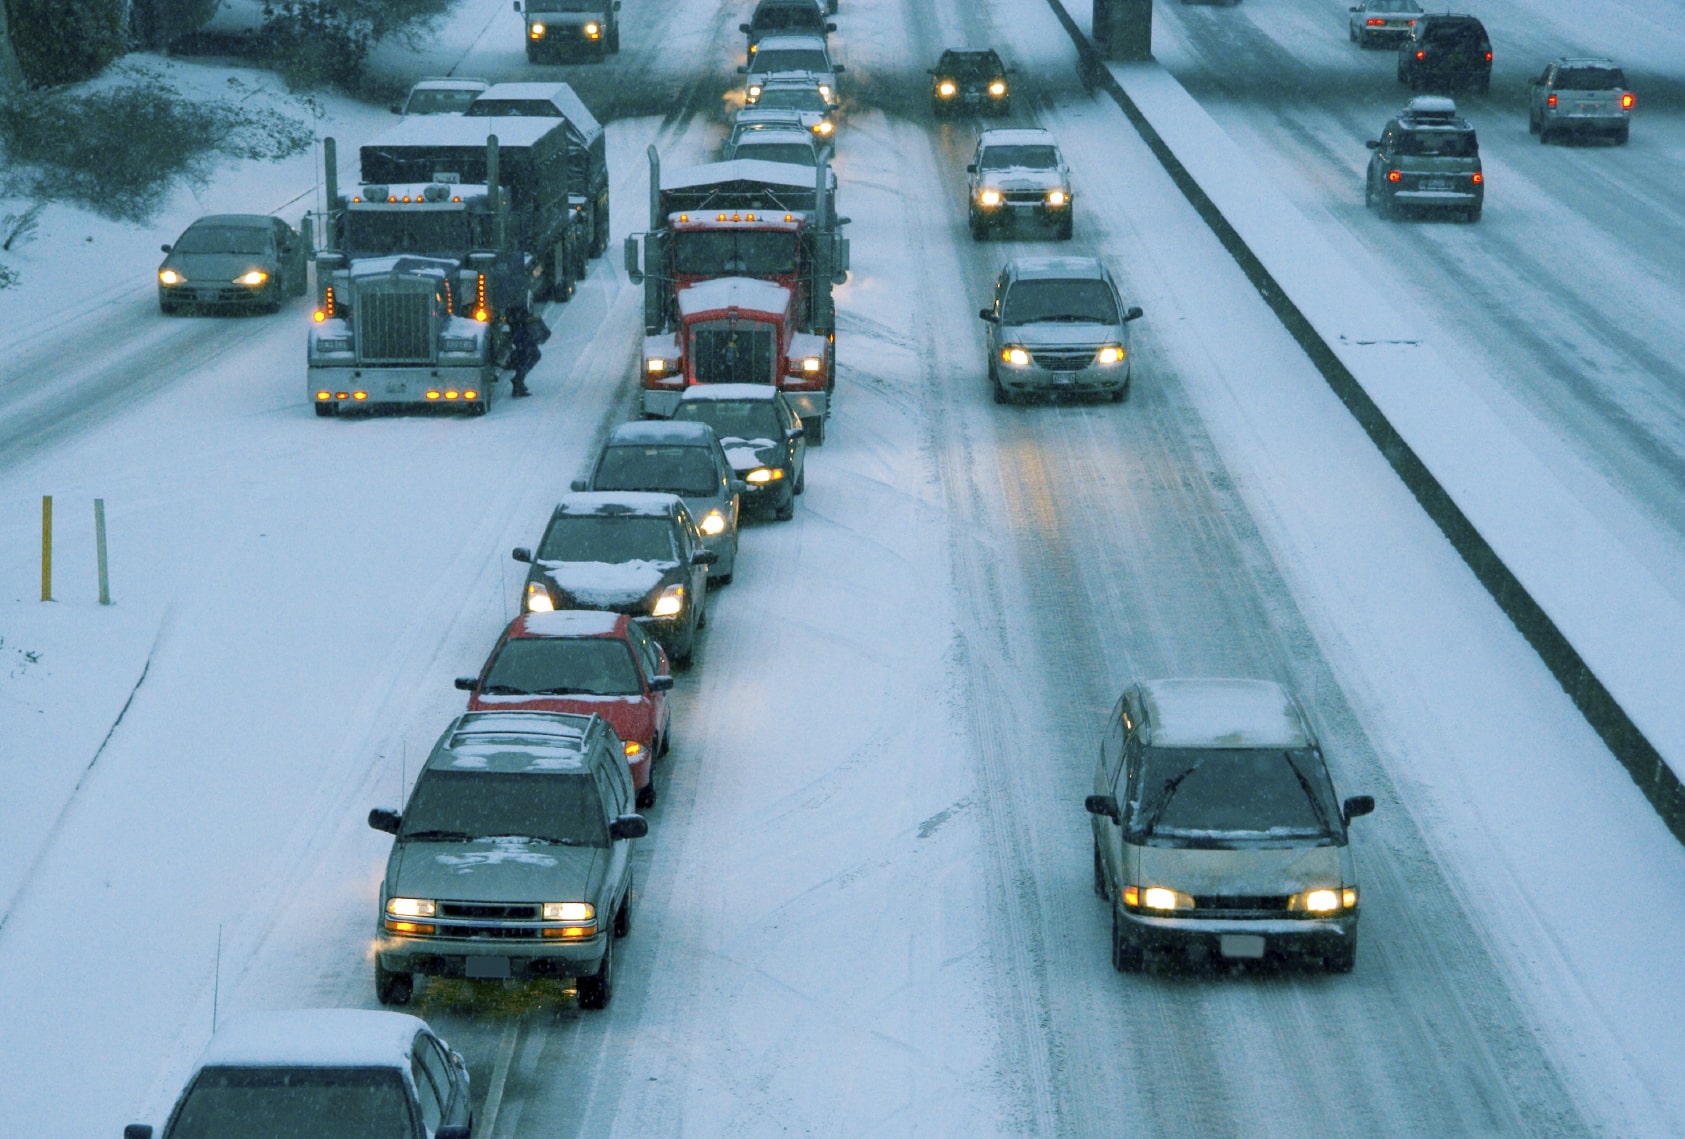 Be Prepared for Driving in Winter Conditions